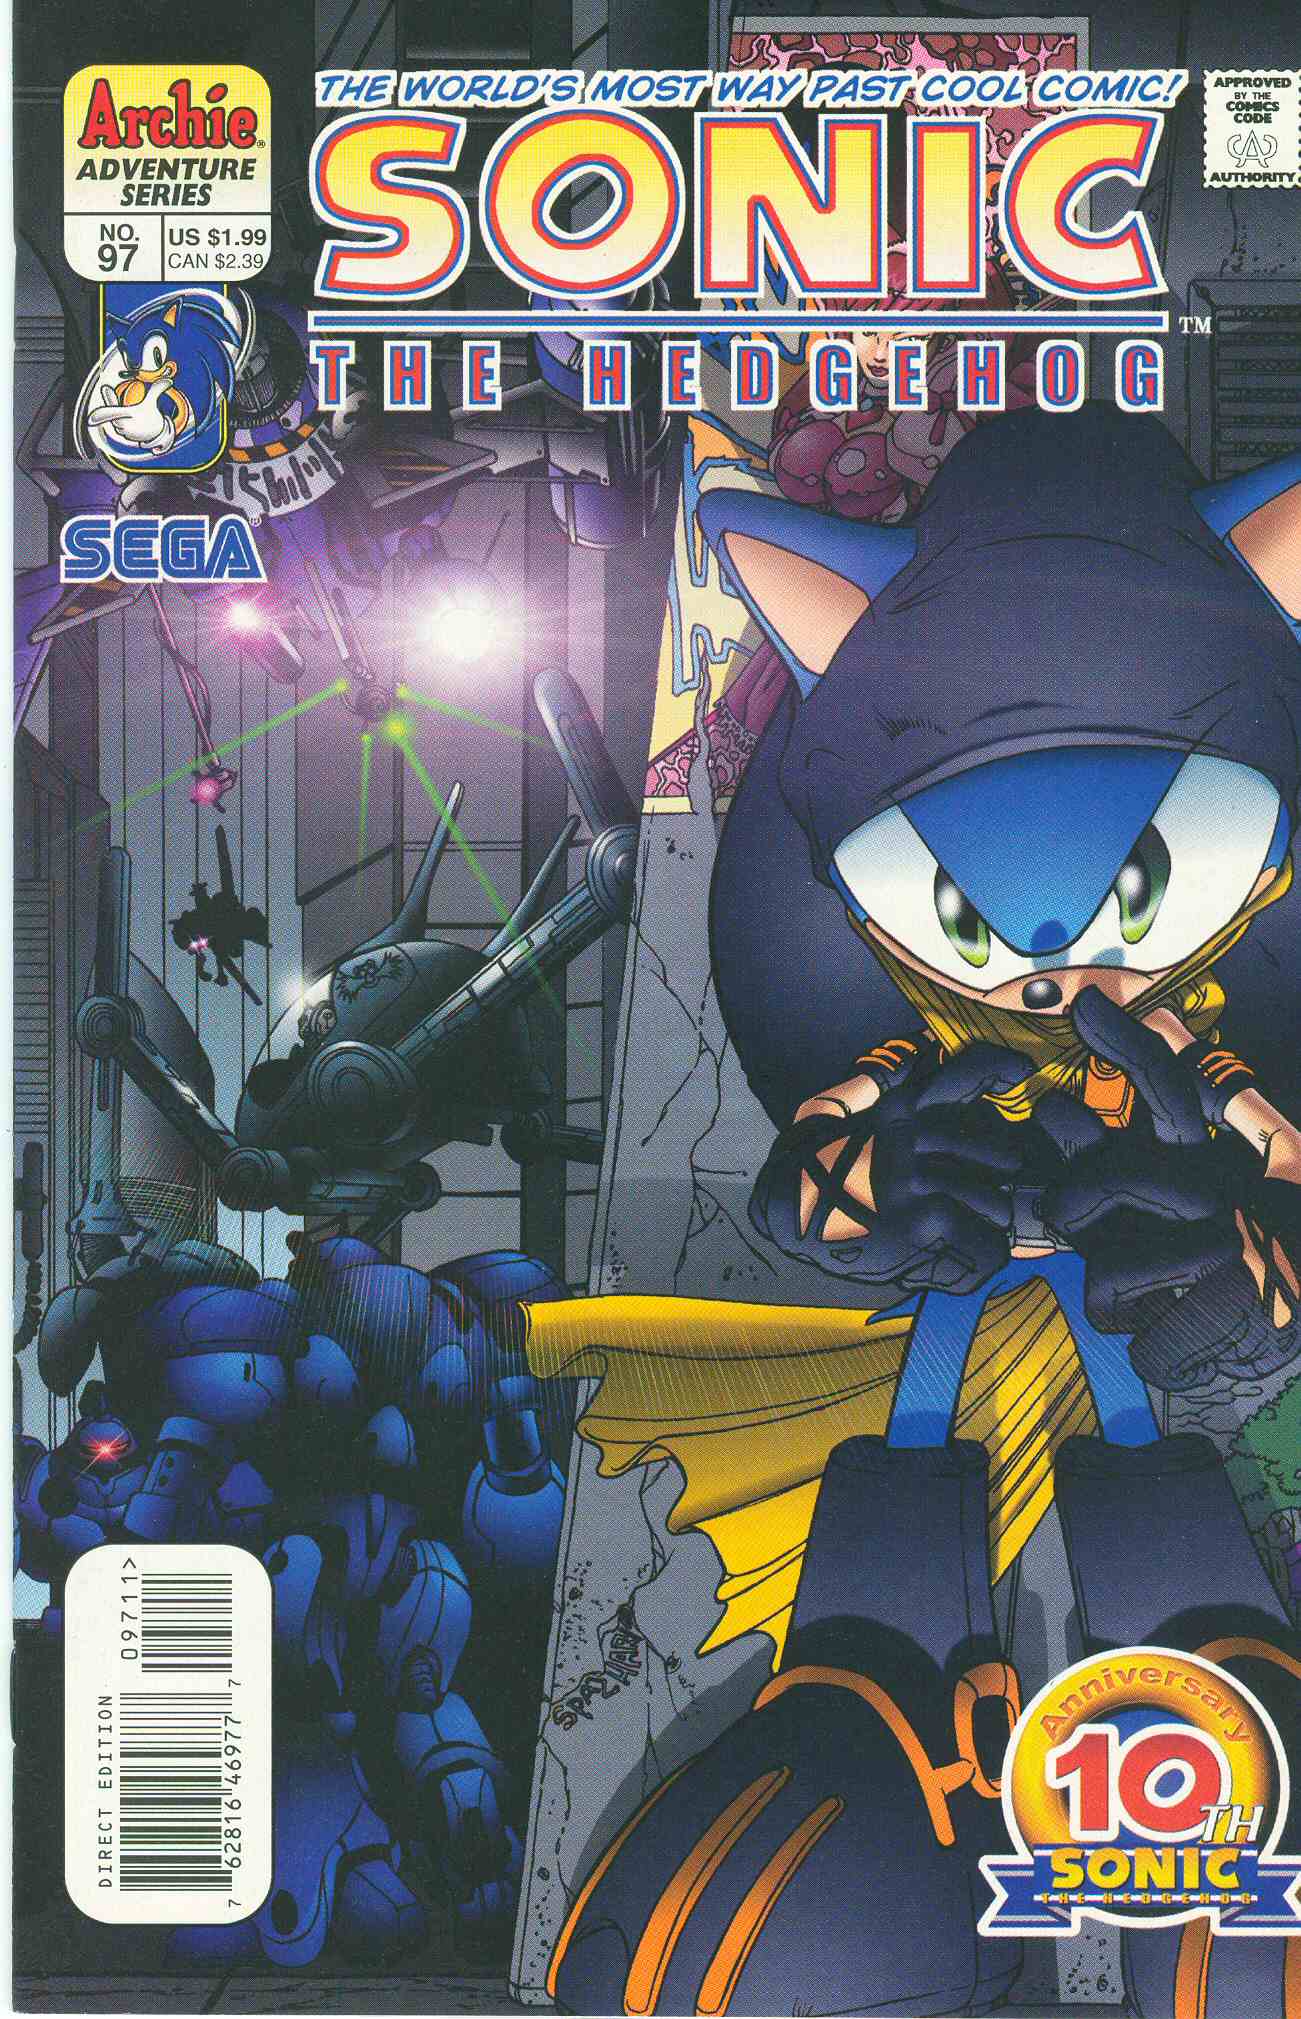 Sonic - Archie Adventure Series July 2001 Comic cover page